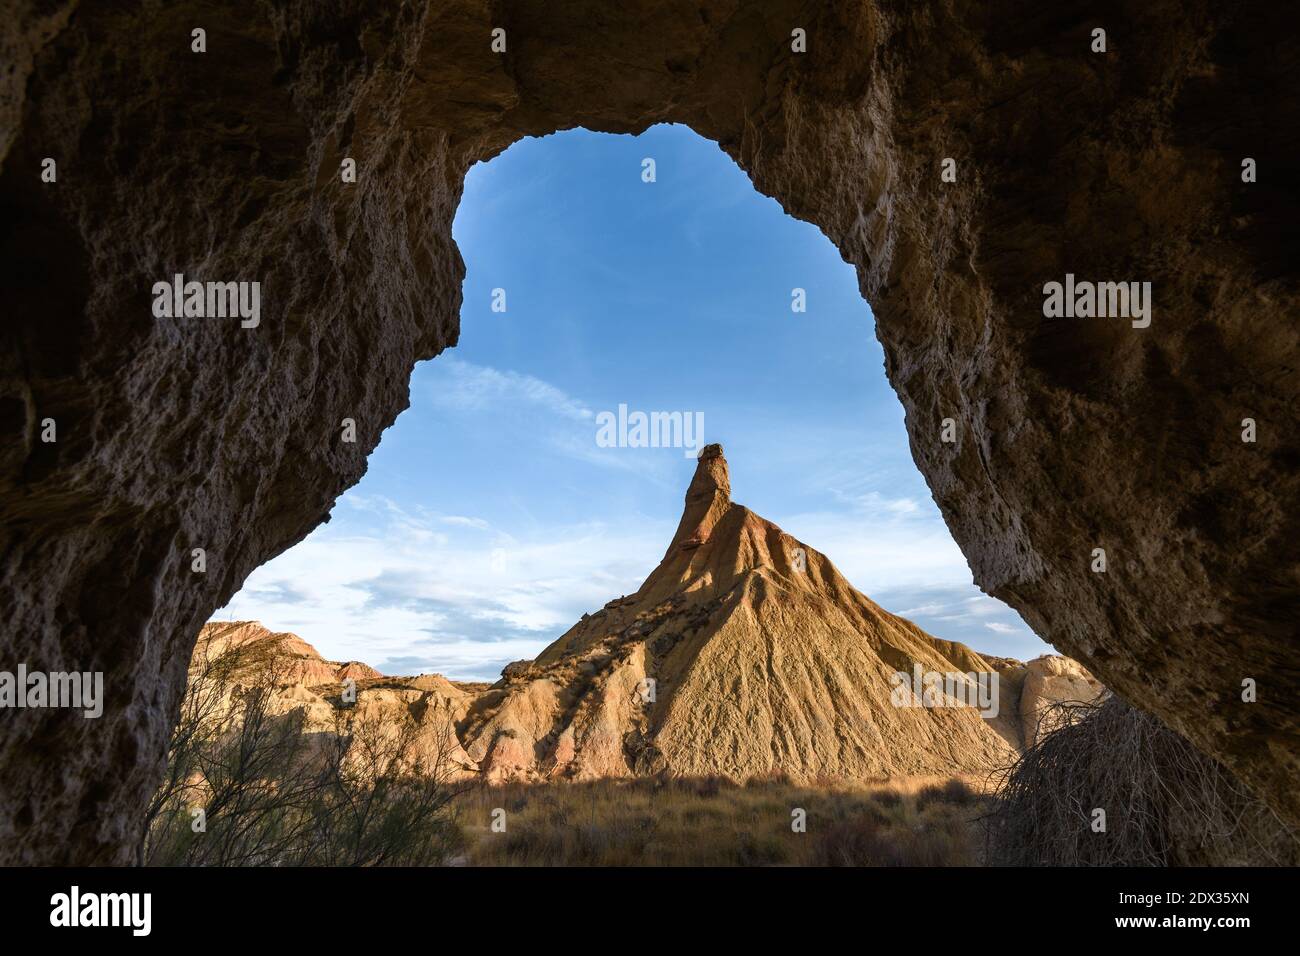 Castildetierra sandstone seen from a cave at Bardenas Reales, Navarre, Spain Stock Photo